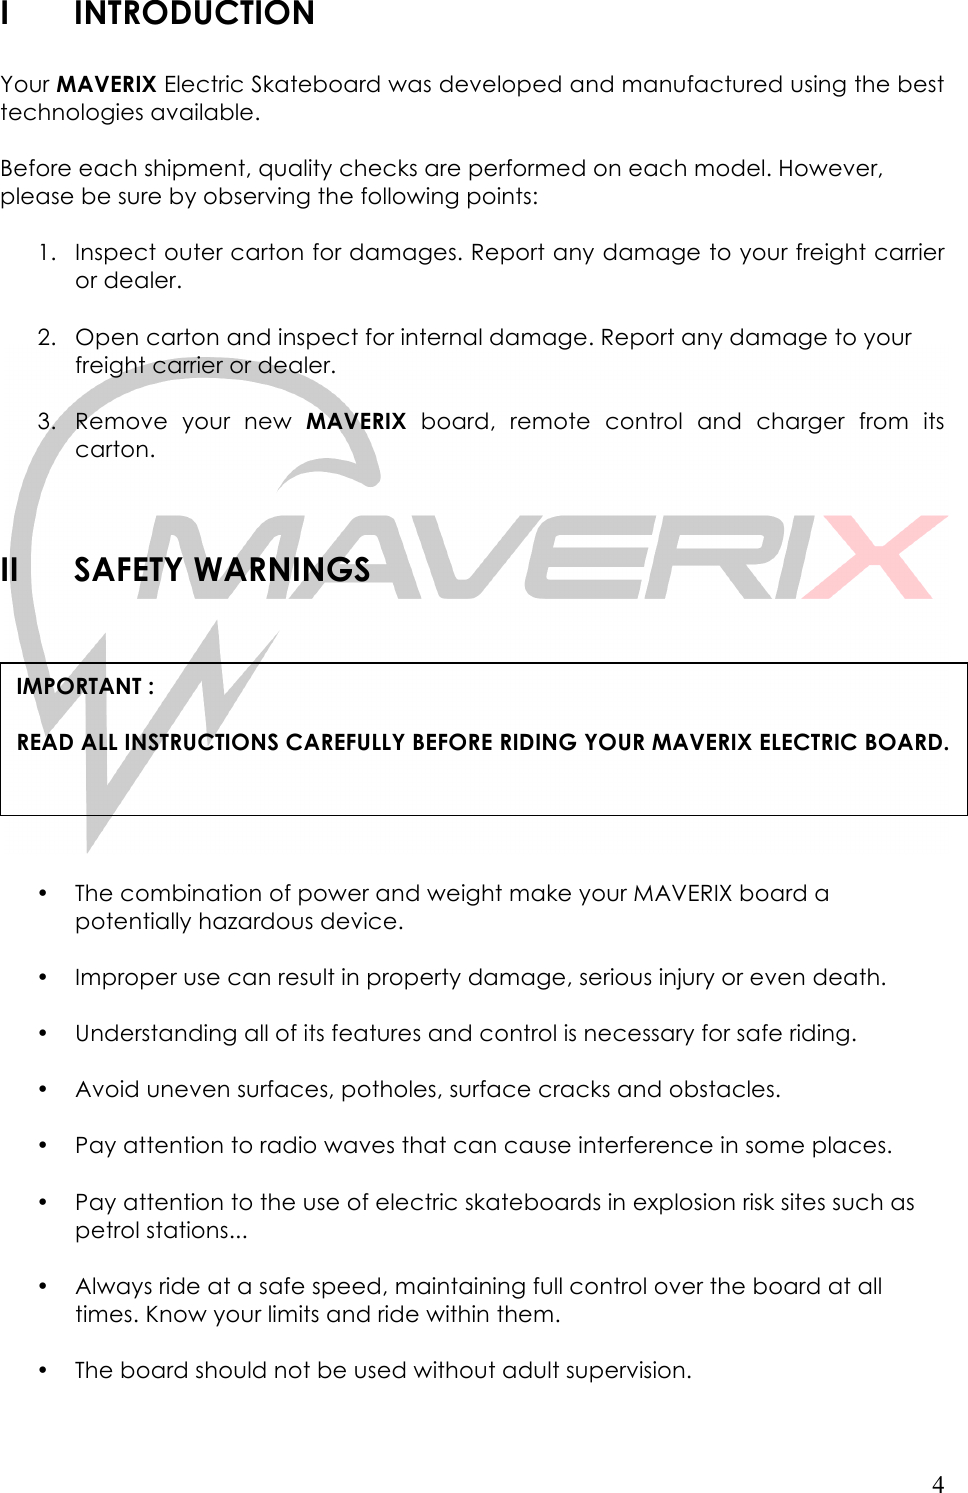   4 I INTRODUCTION  Your MAVERIX Electric Skateboard was developed and manufactured using the best technologies available.  Before each shipment, quality checks are performed on each model. However, please be sure by observing the following points:  1. Inspect outer carton for damages. Report any damage to your freight carrier or dealer.   2. Open carton and inspect for internal damage. Report any damage to your freight carrier or dealer.   3. Remove  your new  MAVERIX board,  remote  control  and  charger from  its carton.    II SAFETY WARNINGS    • The combination of power and weight make your MAVERIX board a potentially hazardous device.   • Improper use can result in property damage, serious injury or even death.   • Understanding all of its features and control is necessary for safe riding.   • Avoid uneven surfaces, potholes, surface cracks and obstacles.   • Pay attention to radio waves that can cause interference in some places.  • Pay attention to the use of electric skateboards in explosion risk sites such as petrol stations...  • Always ride at a safe speed, maintaining full control over the board at all times. Know your limits and ride within them.   • The board should not be used without adult supervision.   IMPORTANT :   READ ALL INSTRUCTIONS CAREFULLY BEFORE RIDING YOUR MAVERIX ELECTRIC BOARD.  